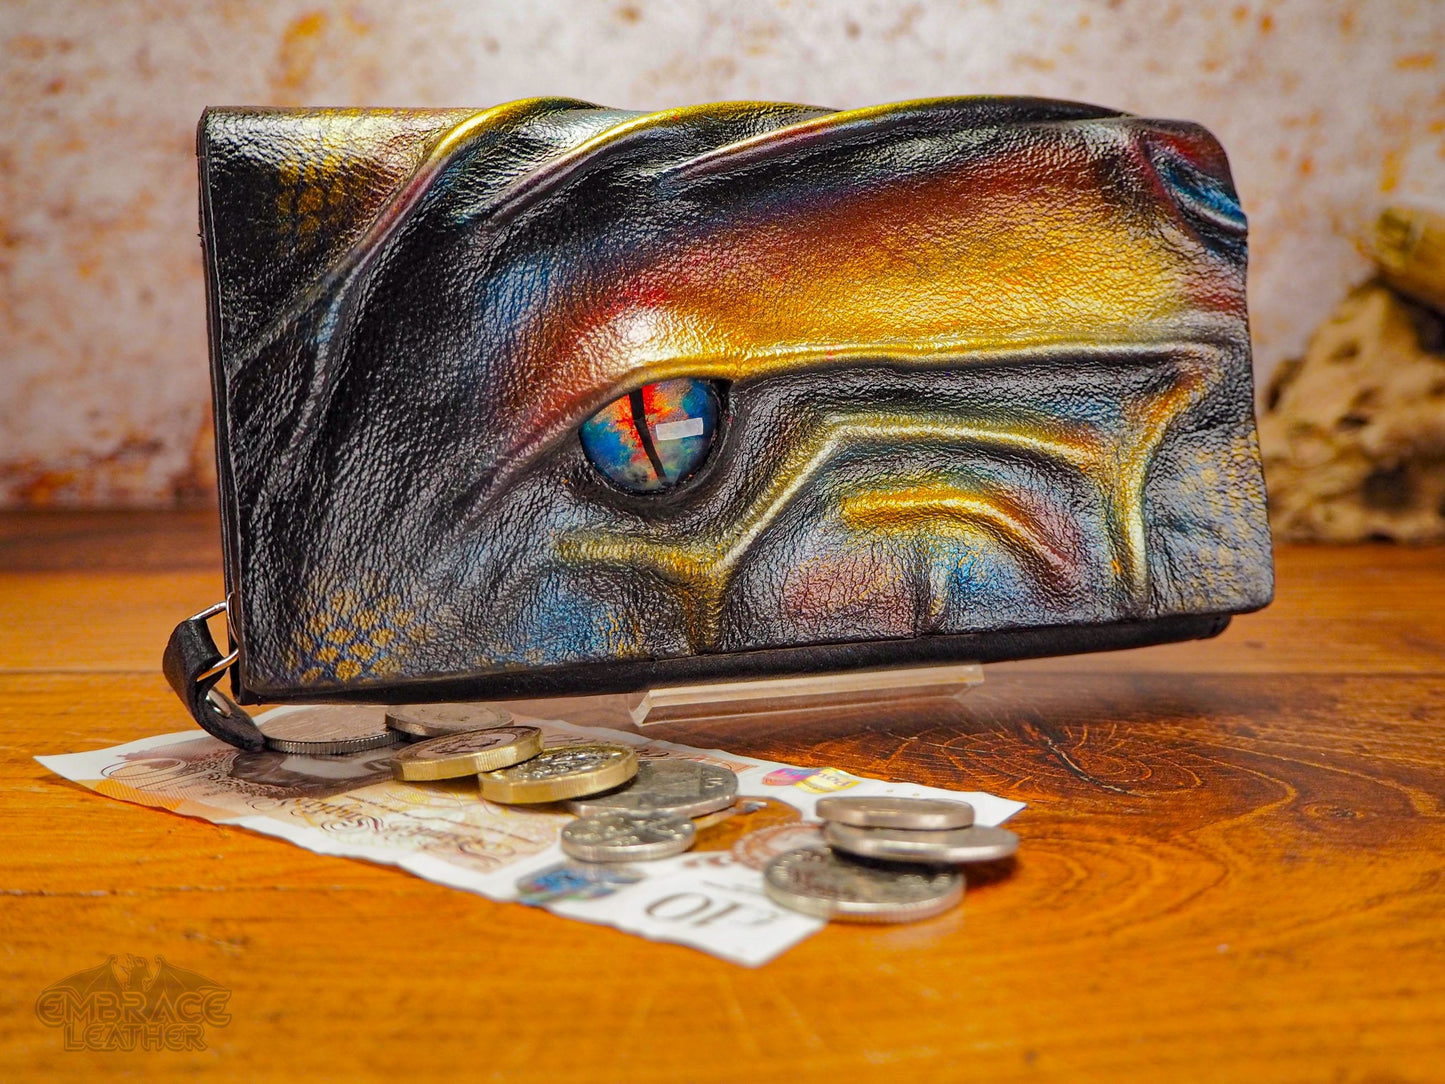 Large Leather Purse for Women with Hand Painted Dragon Eye - Dragon Wallet Black Leather Coin Purse